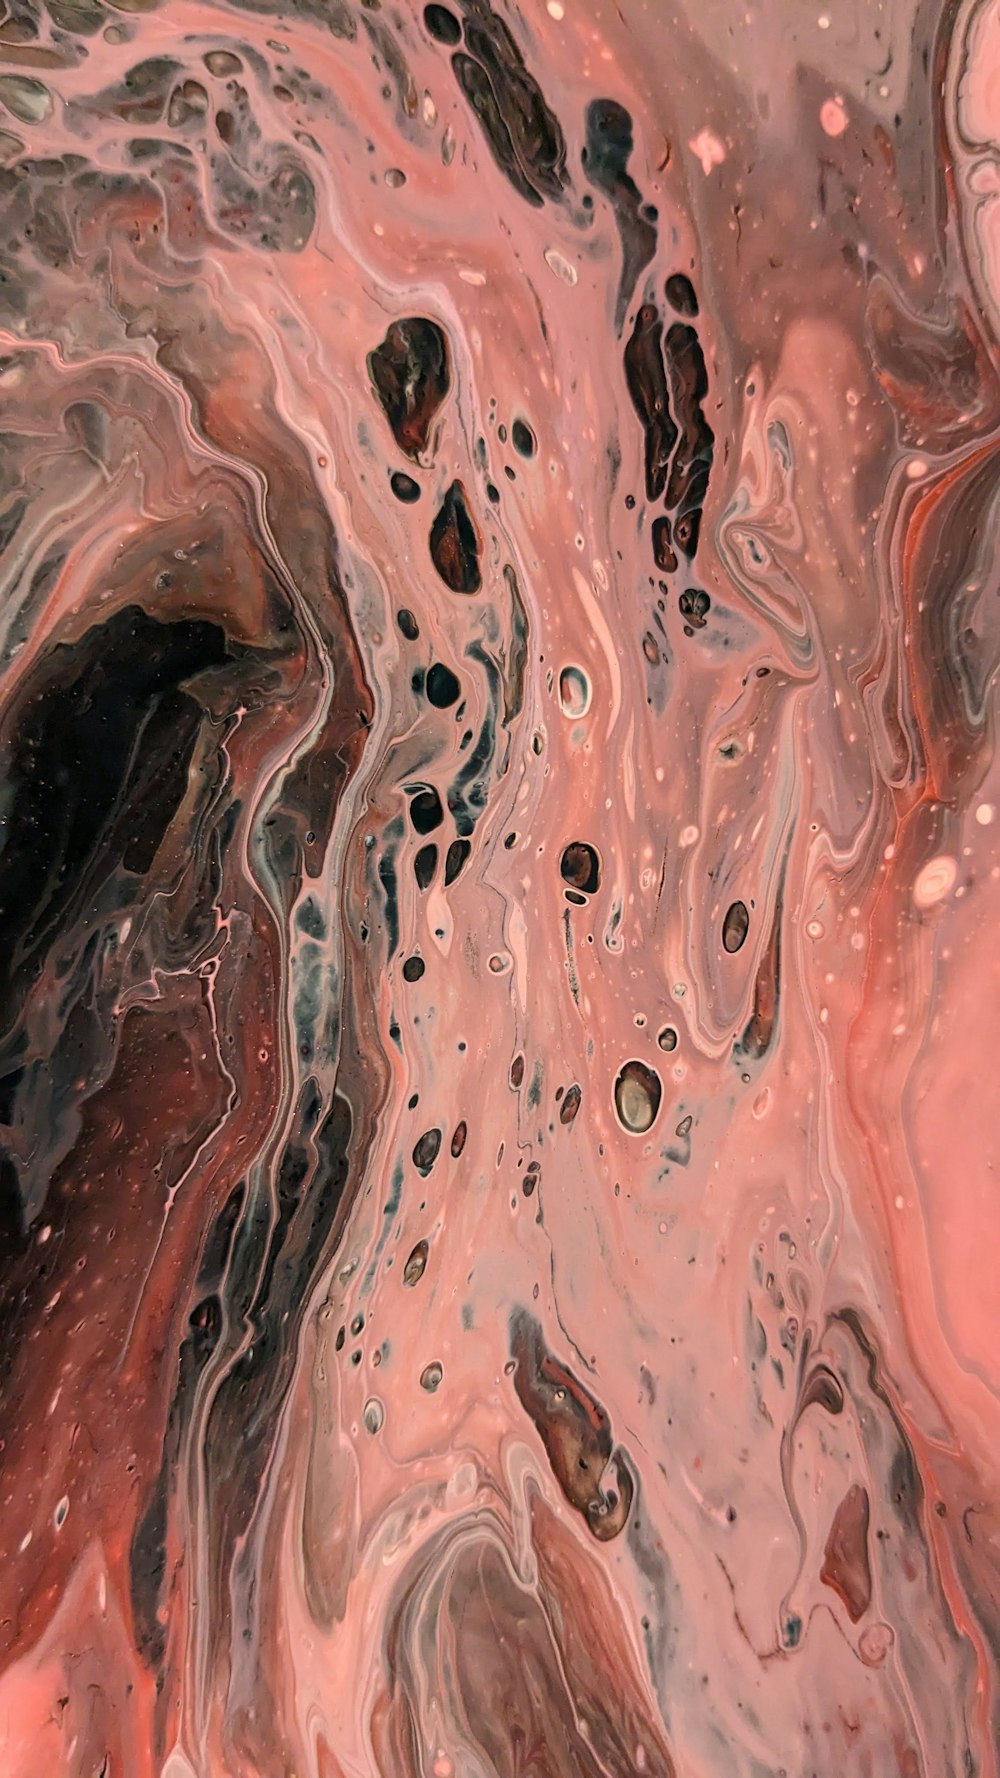 a close up of a pink and black liquid